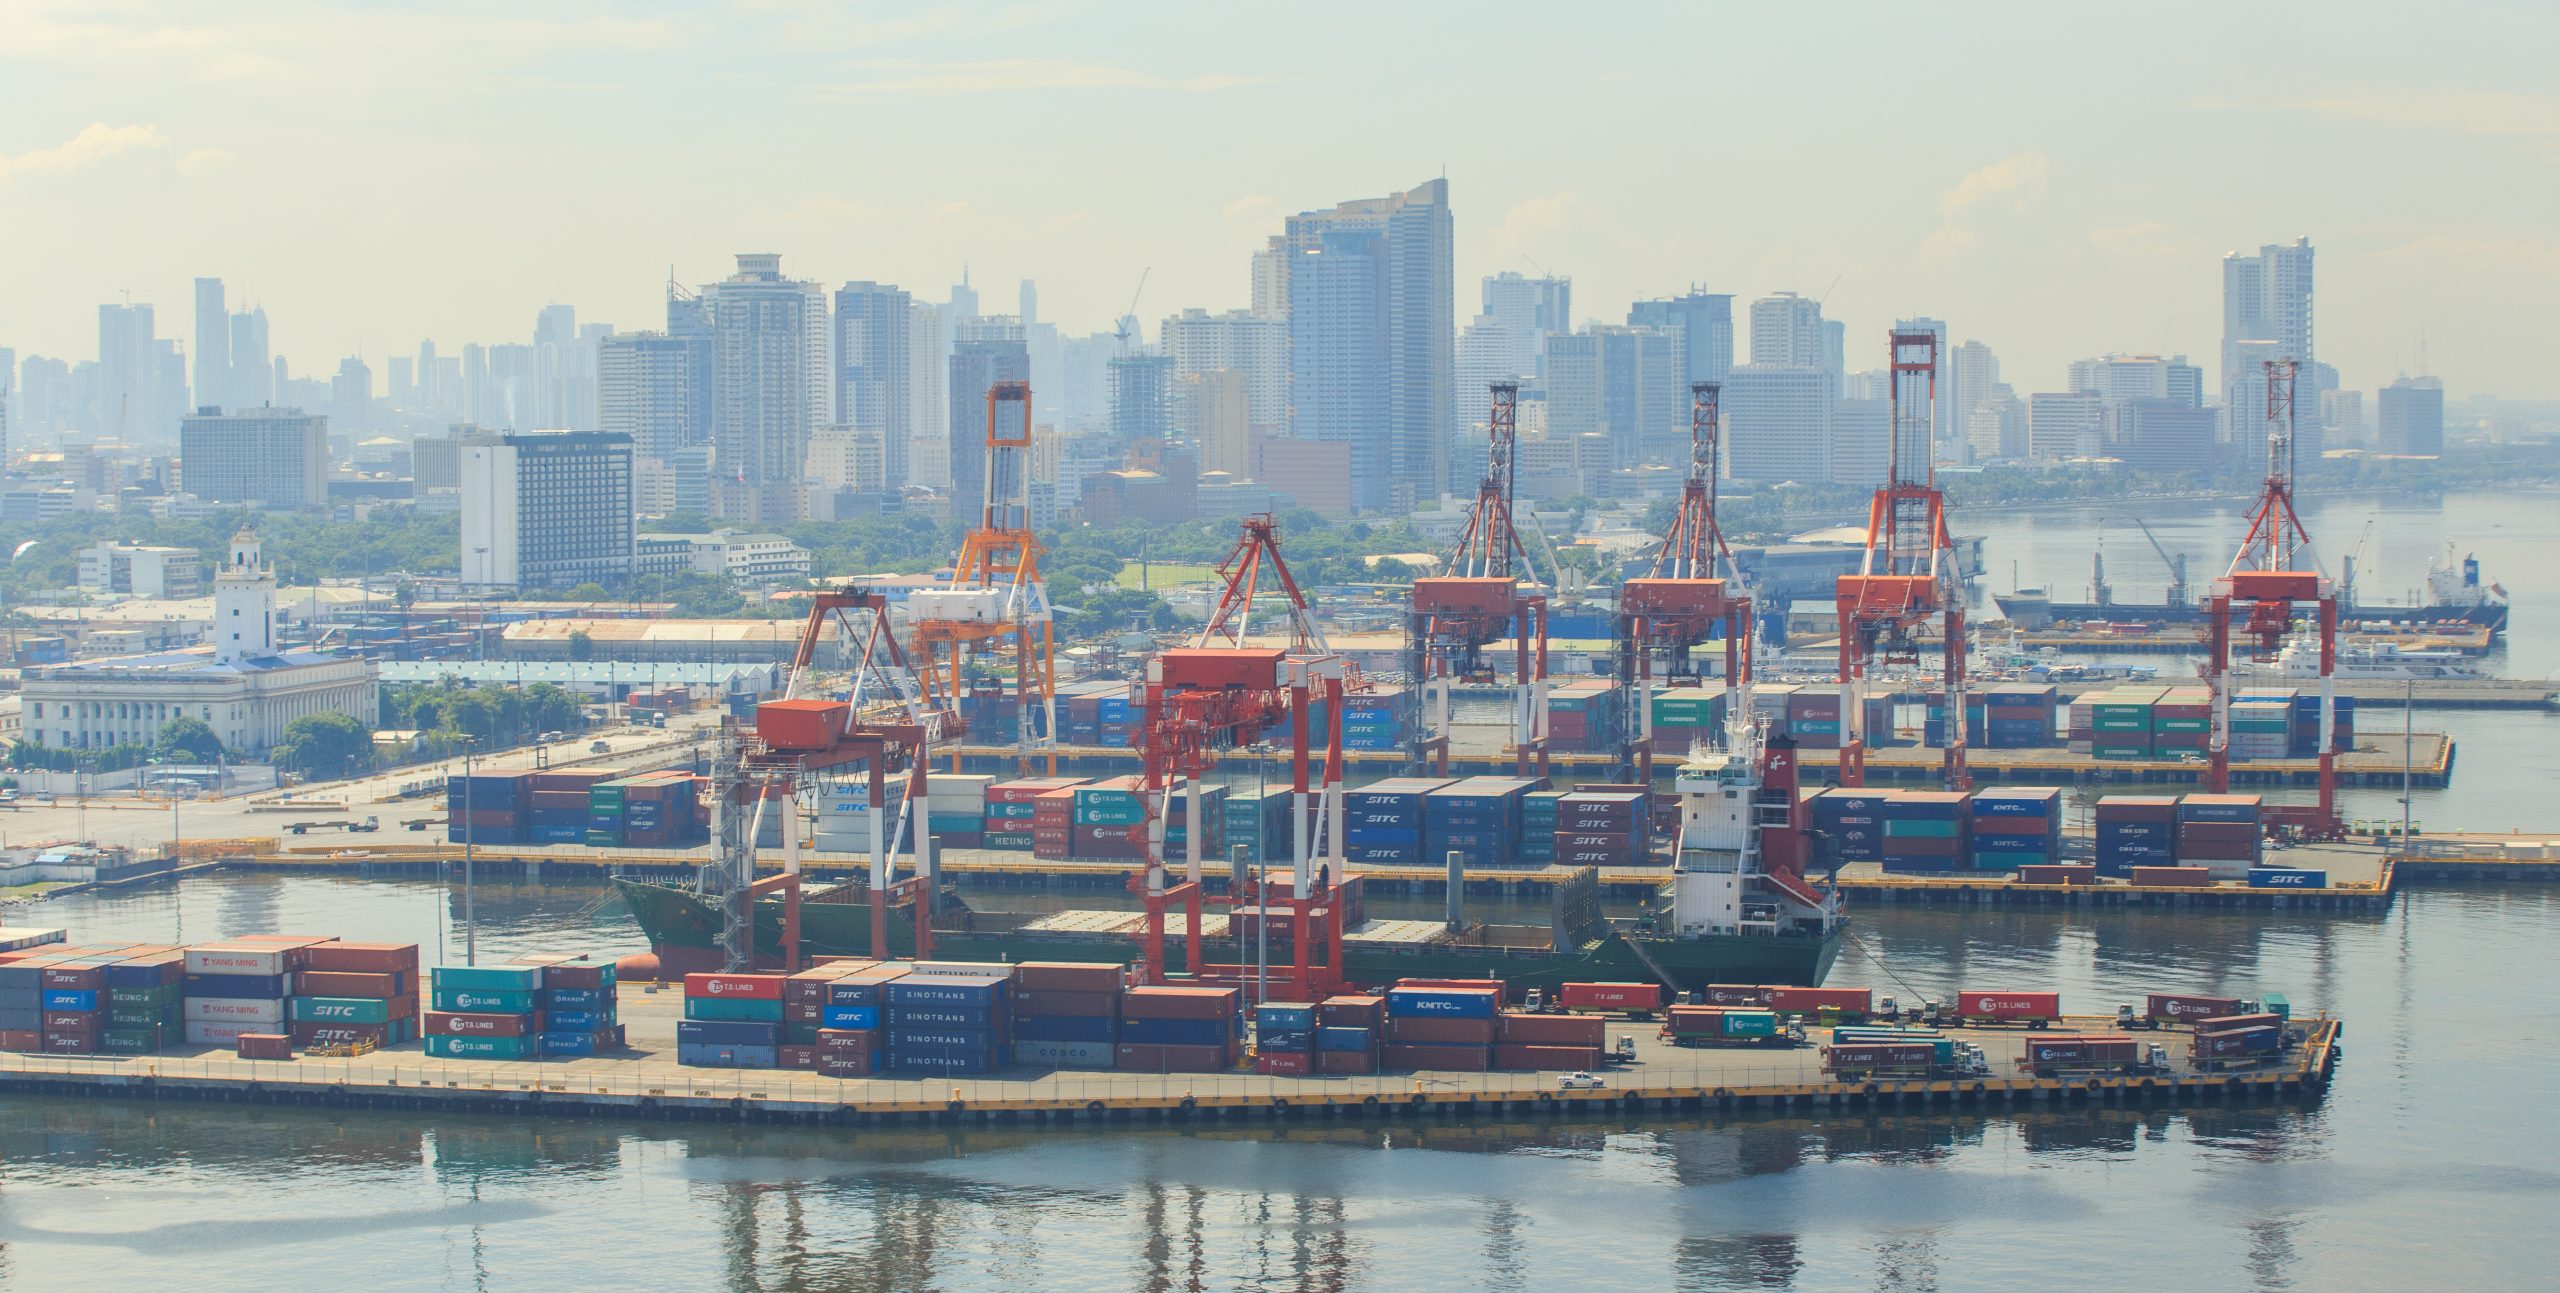 Boosting private sector growth can strengthen Philippine’s economic recovery